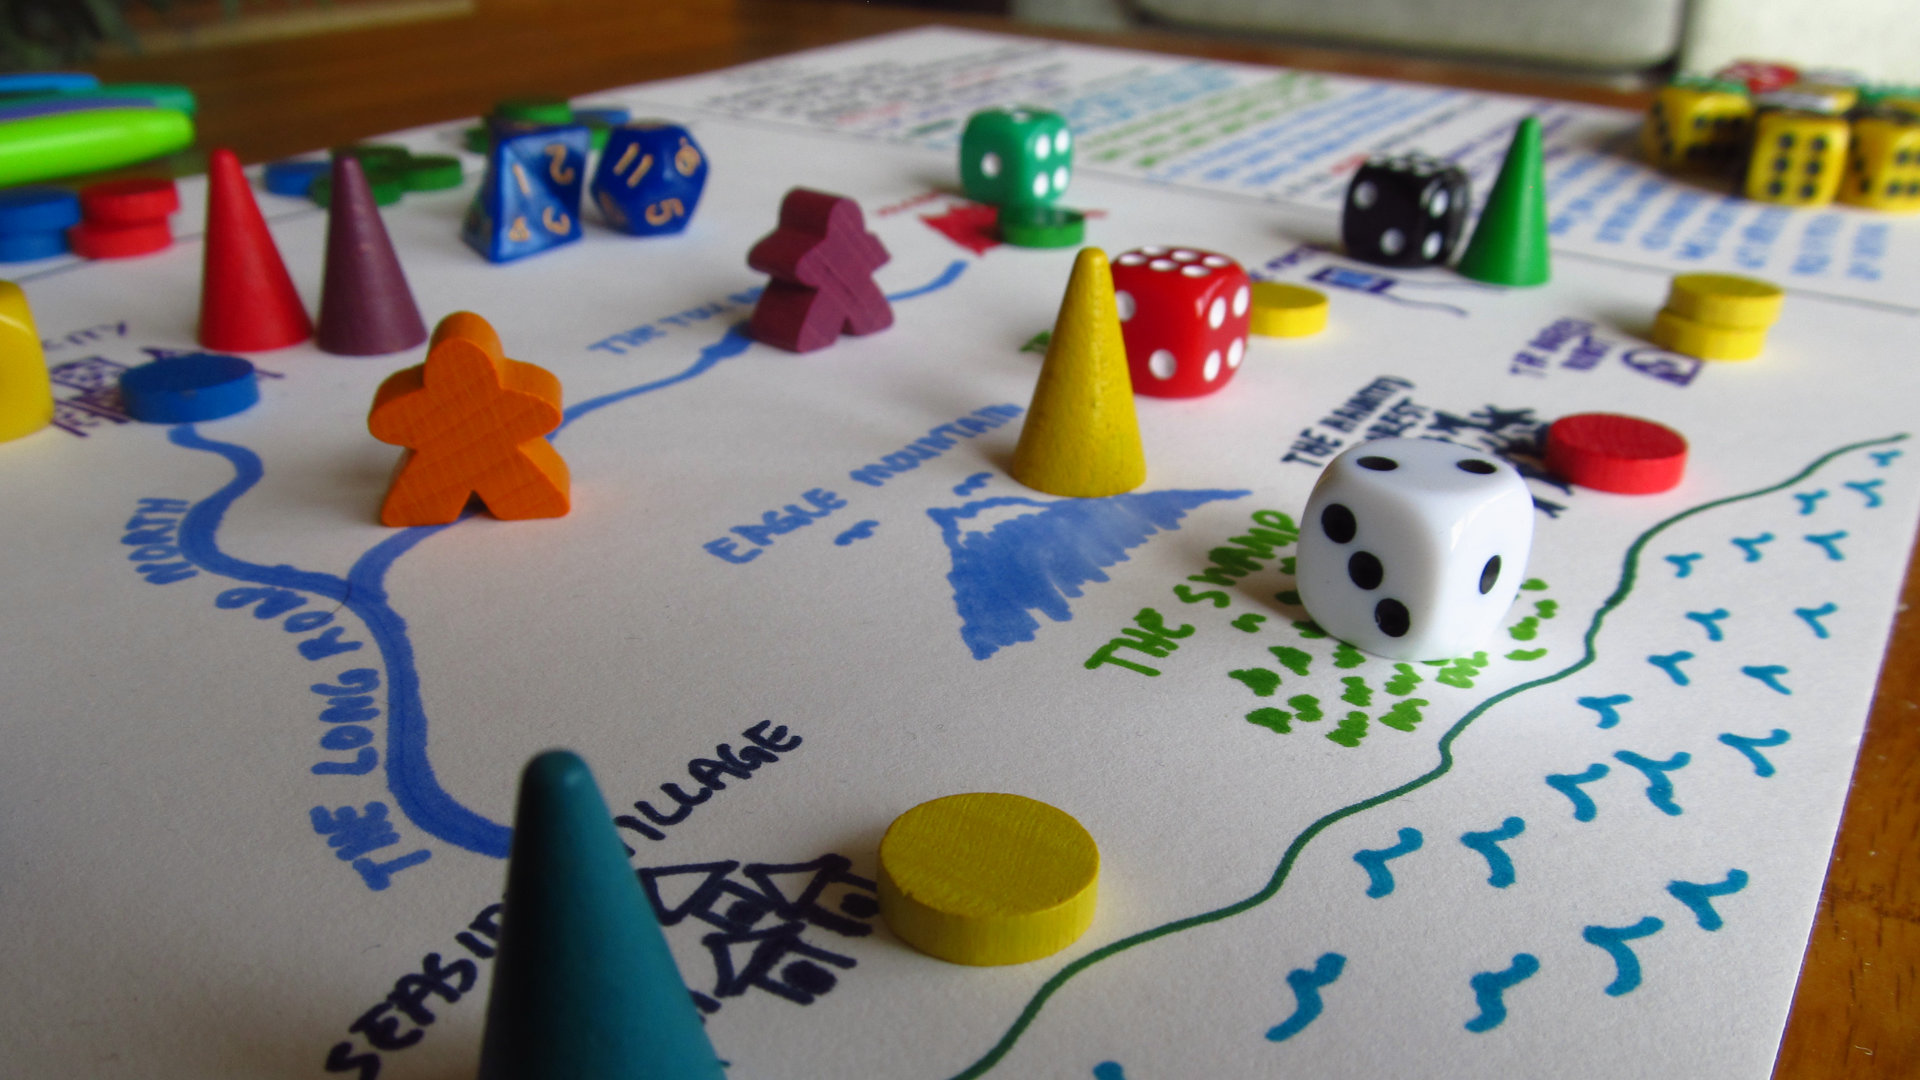 Close up of a game of making it up as we go along, with the game board and various dice and wooden pieces in the foreground